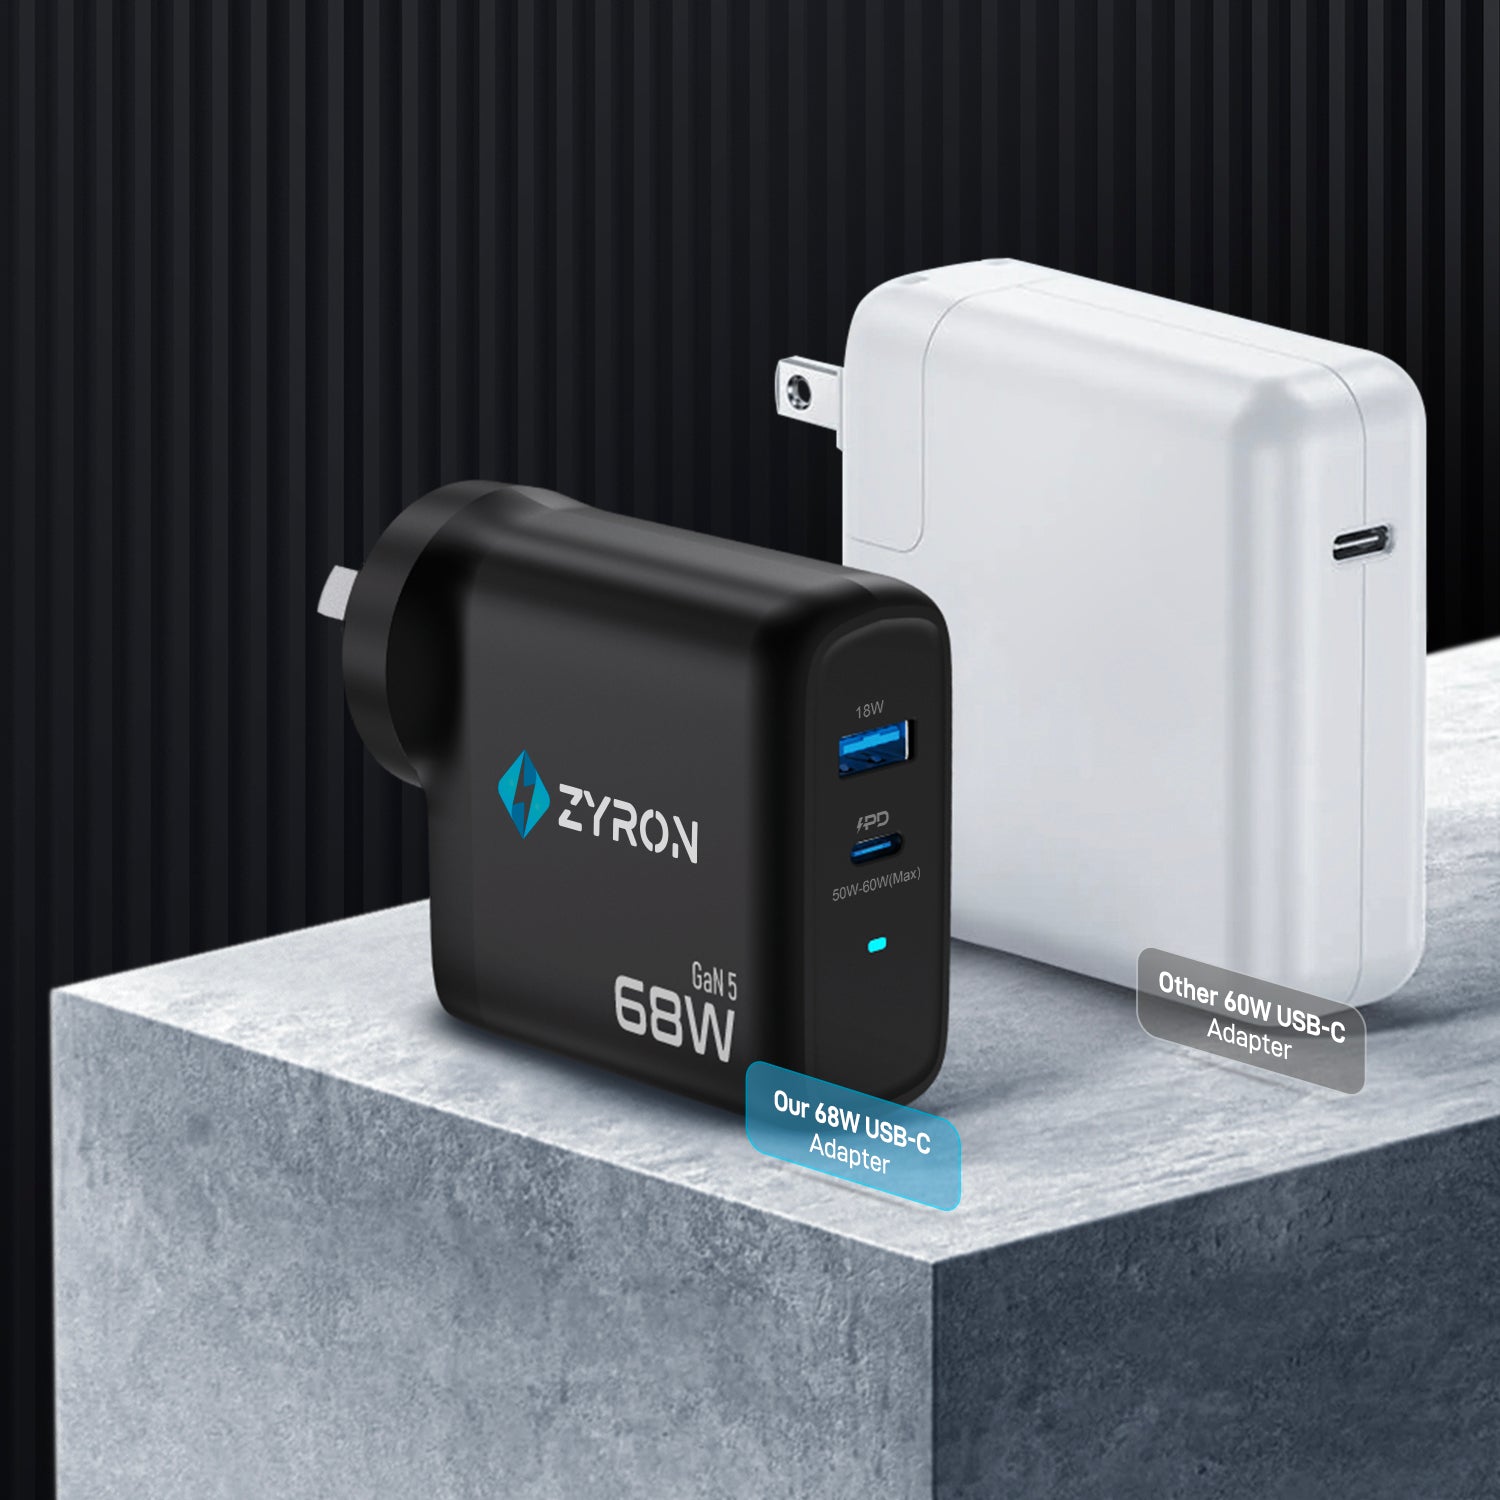 Zyron 68W usb c charger